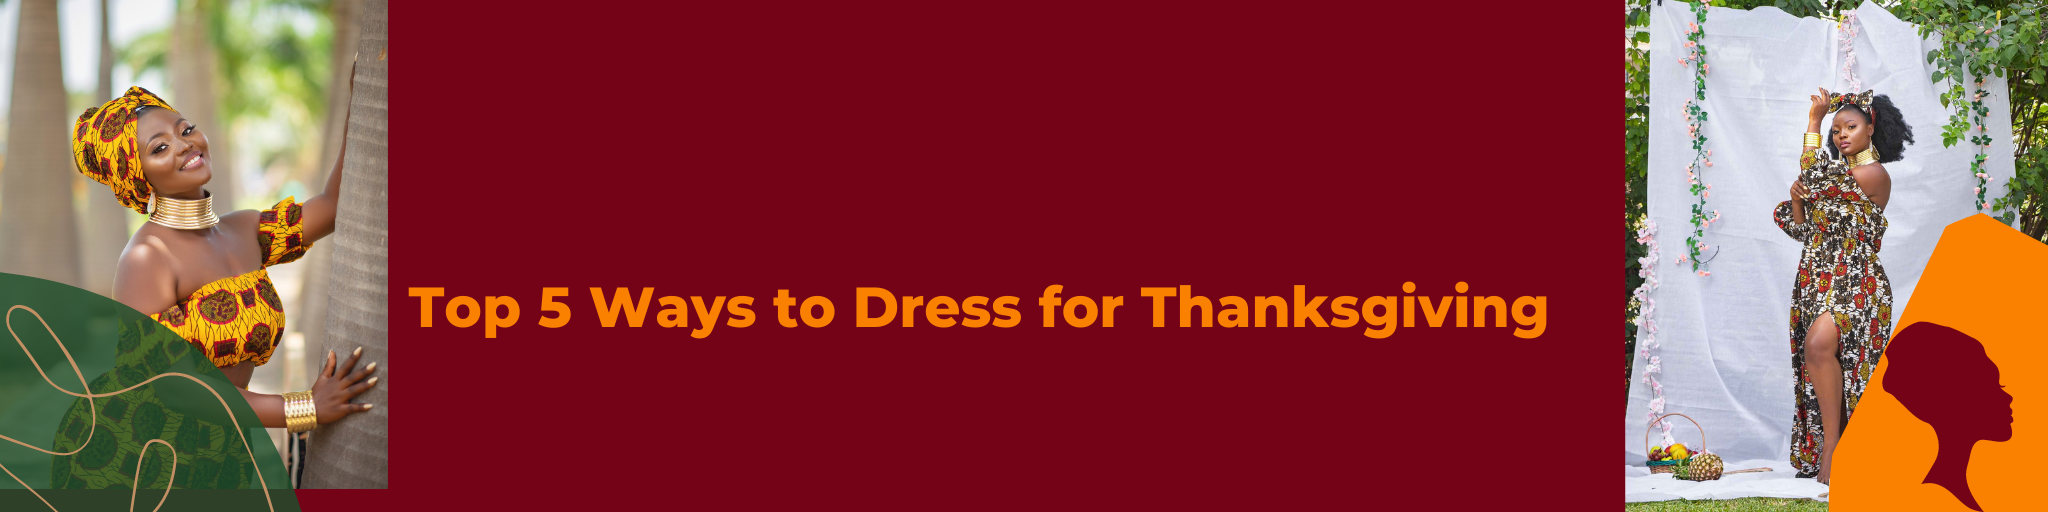 Top 5 Ways to Dress for Thanksgiving